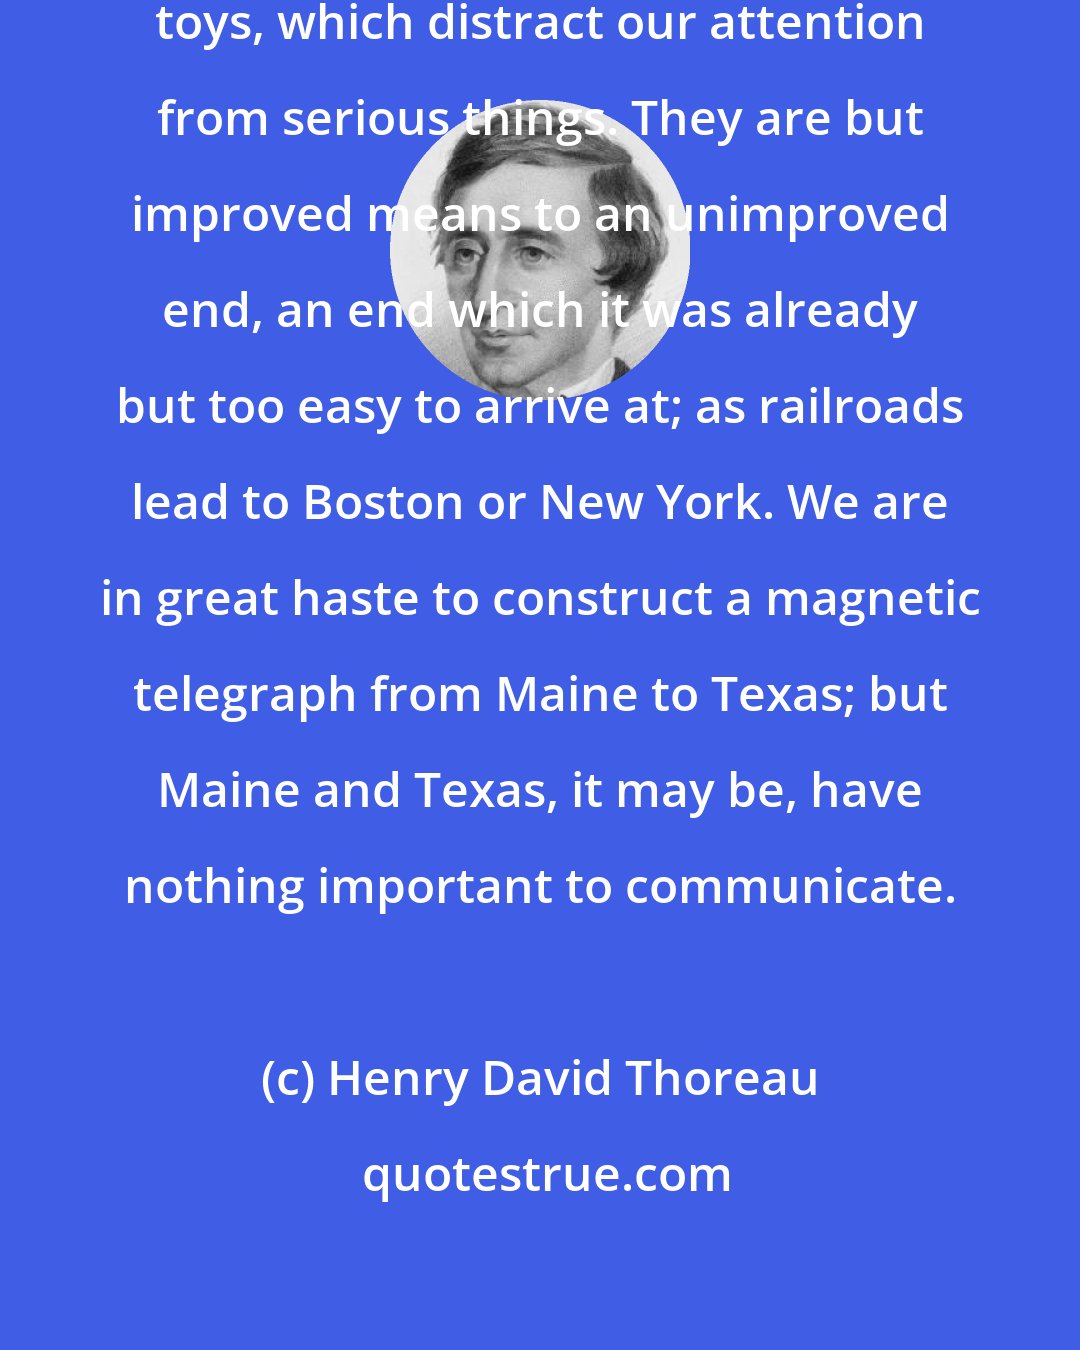 Henry David Thoreau: Our inventions are wont to be pretty toys, which distract our attention from serious things. They are but improved means to an unimproved end, an end which it was already but too easy to arrive at; as railroads lead to Boston or New York. We are in great haste to construct a magnetic telegraph from Maine to Texas; but Maine and Texas, it may be, have nothing important to communicate.